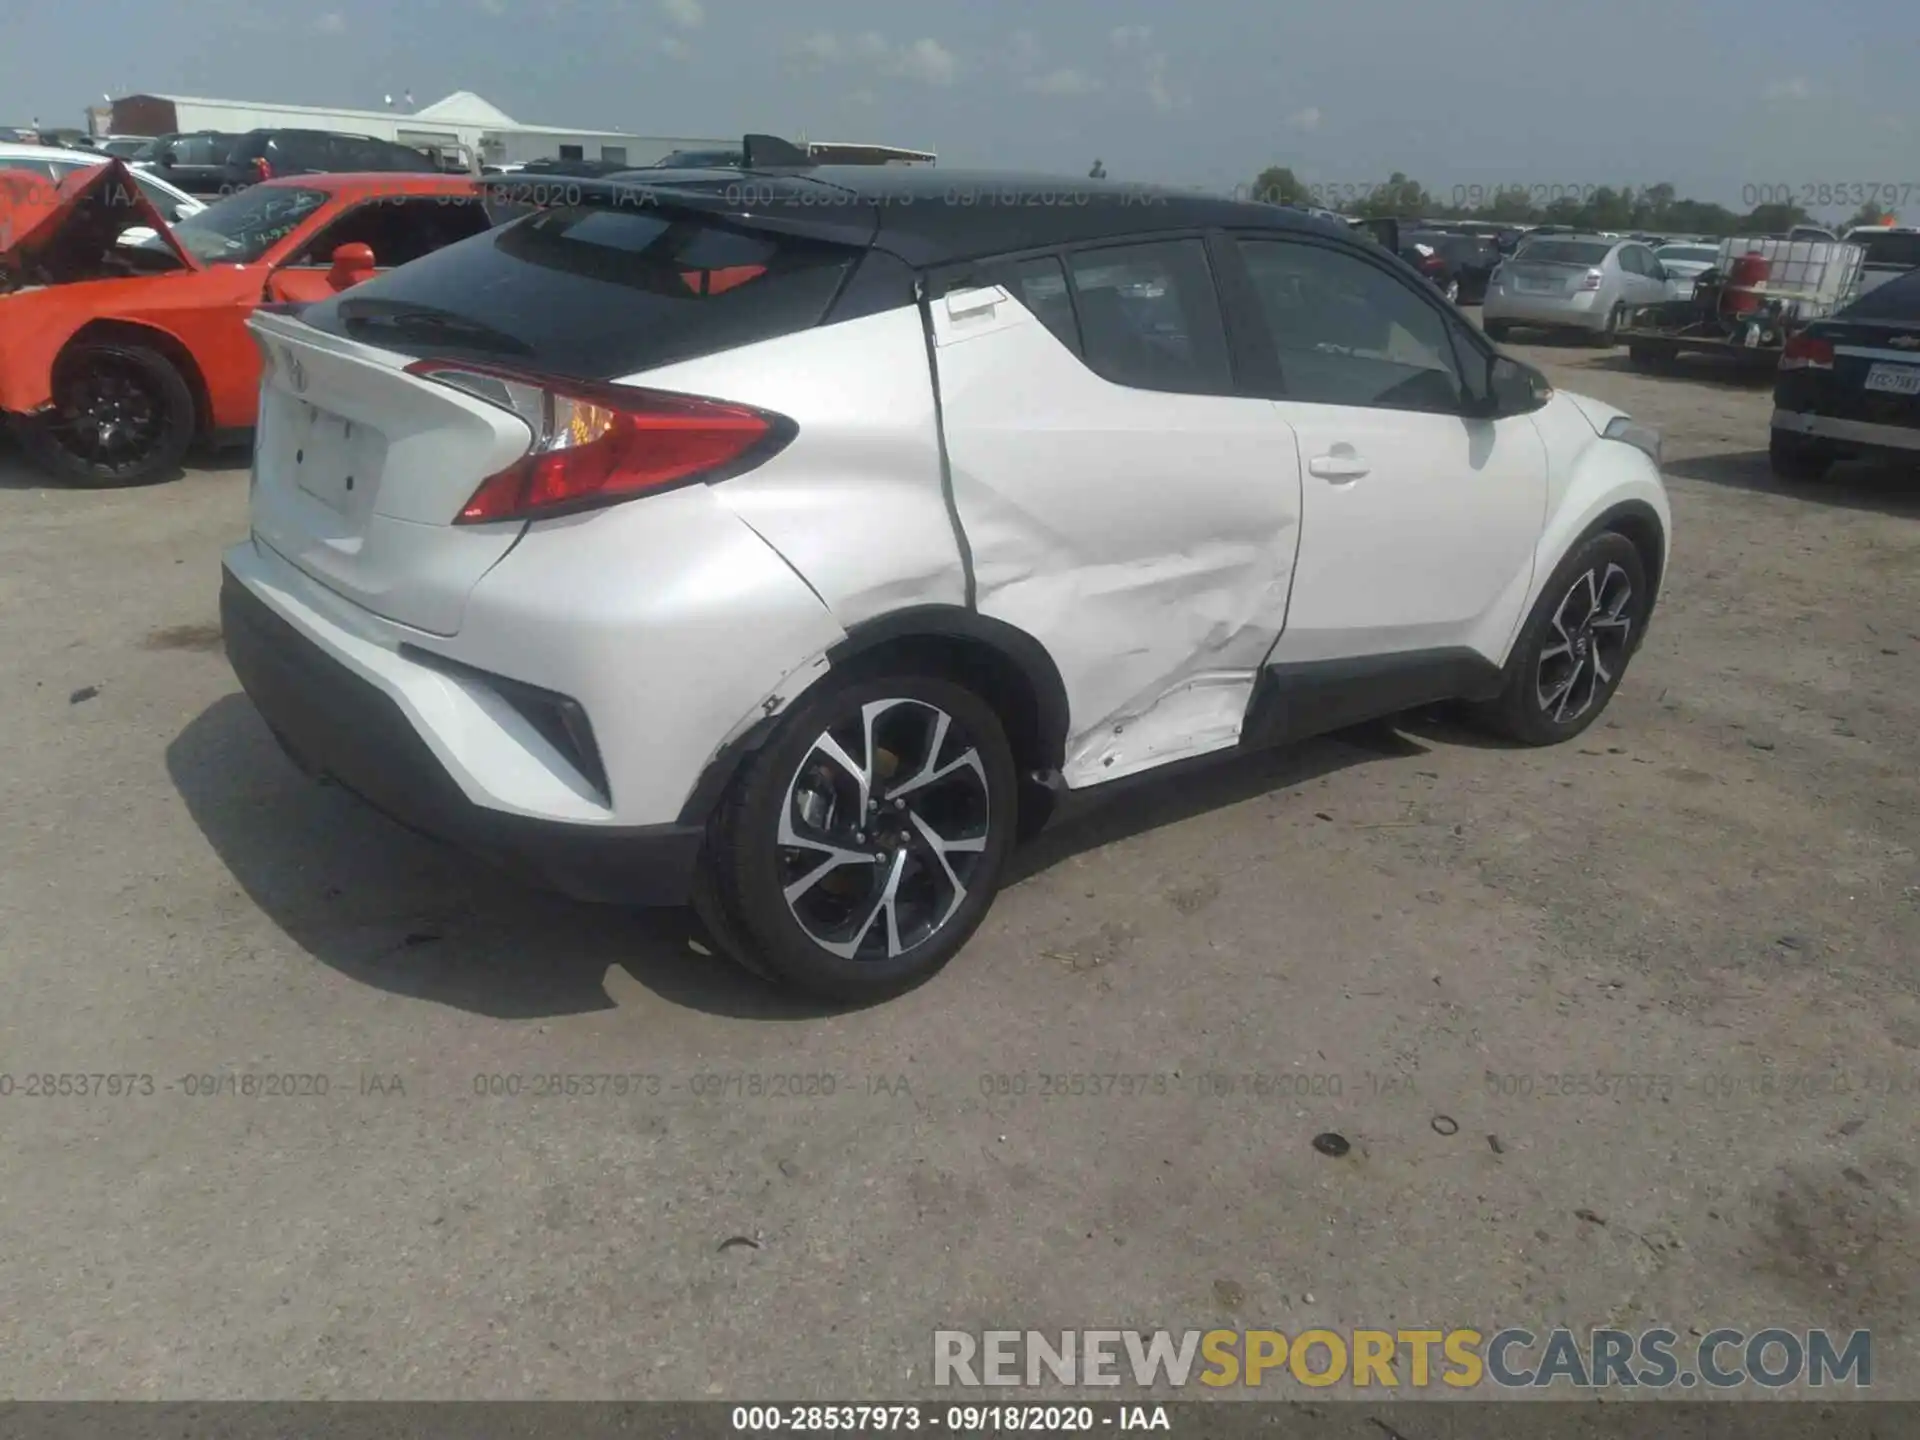 6 Photograph of a damaged car NMTKHMBXXKR085298 TOYOTA C-HR 2019